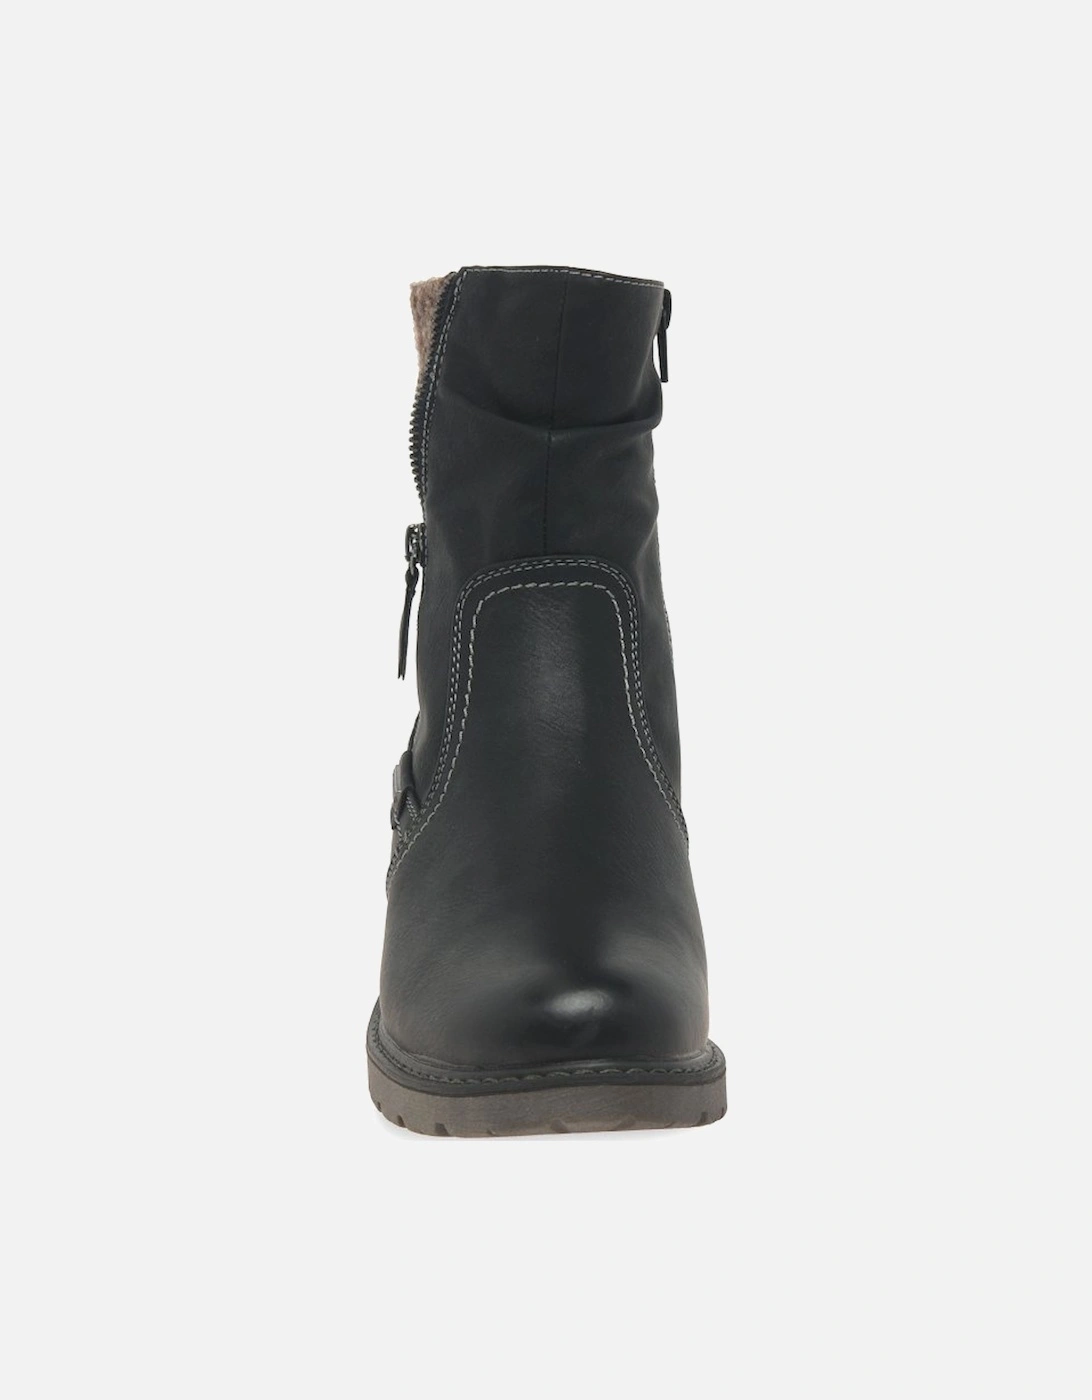 Sleet Womens Ankle Boots